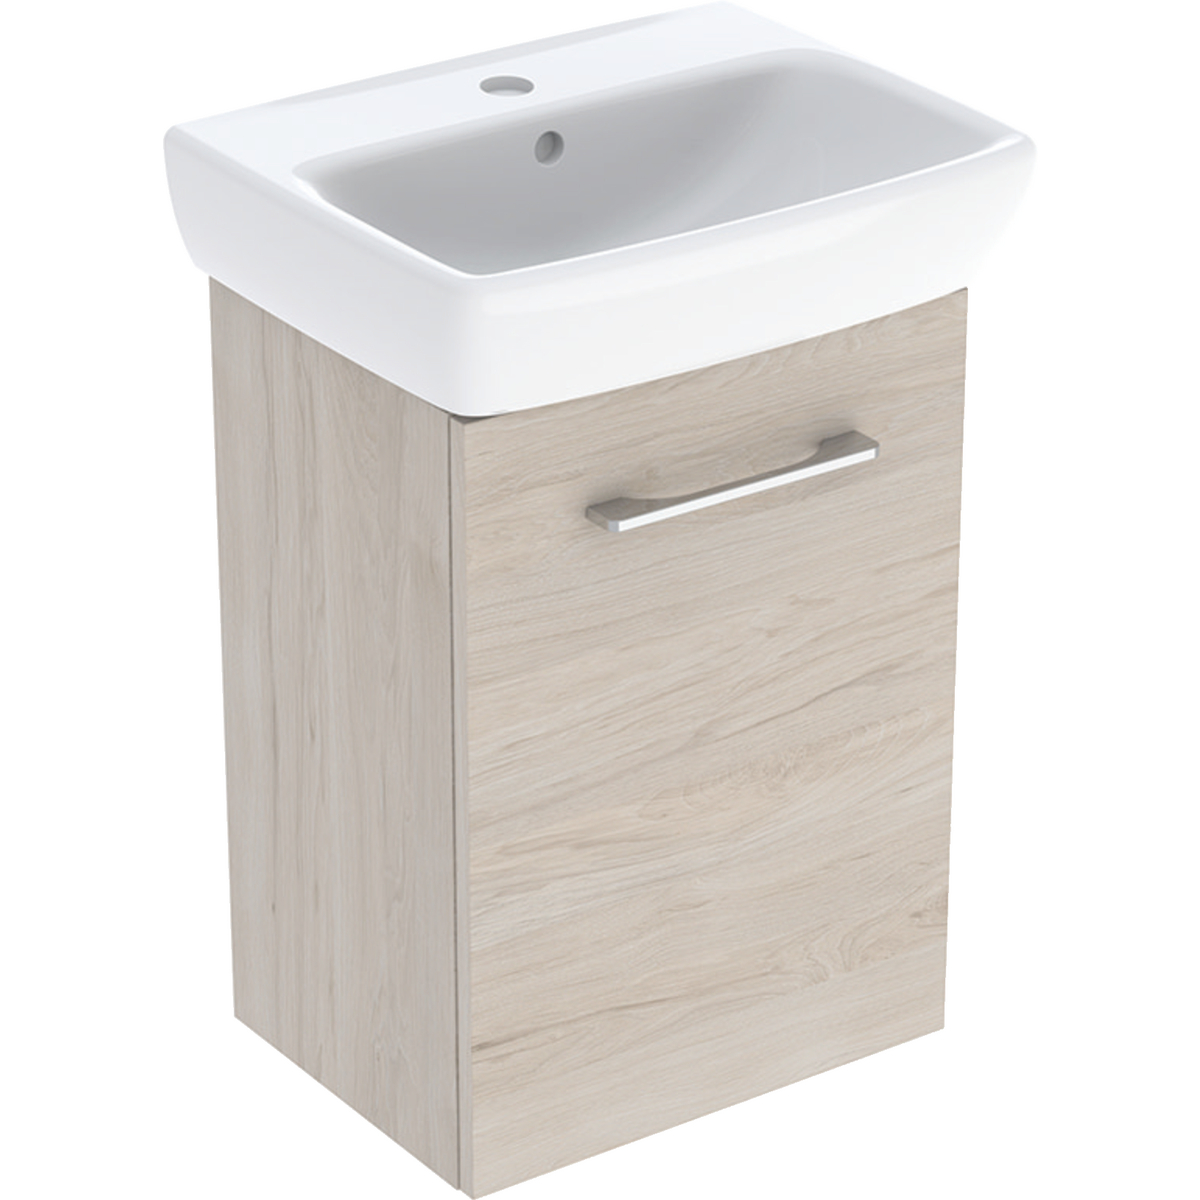 Selnova Square Basins With Cabinet, One Door 450mm - Light Hickory 